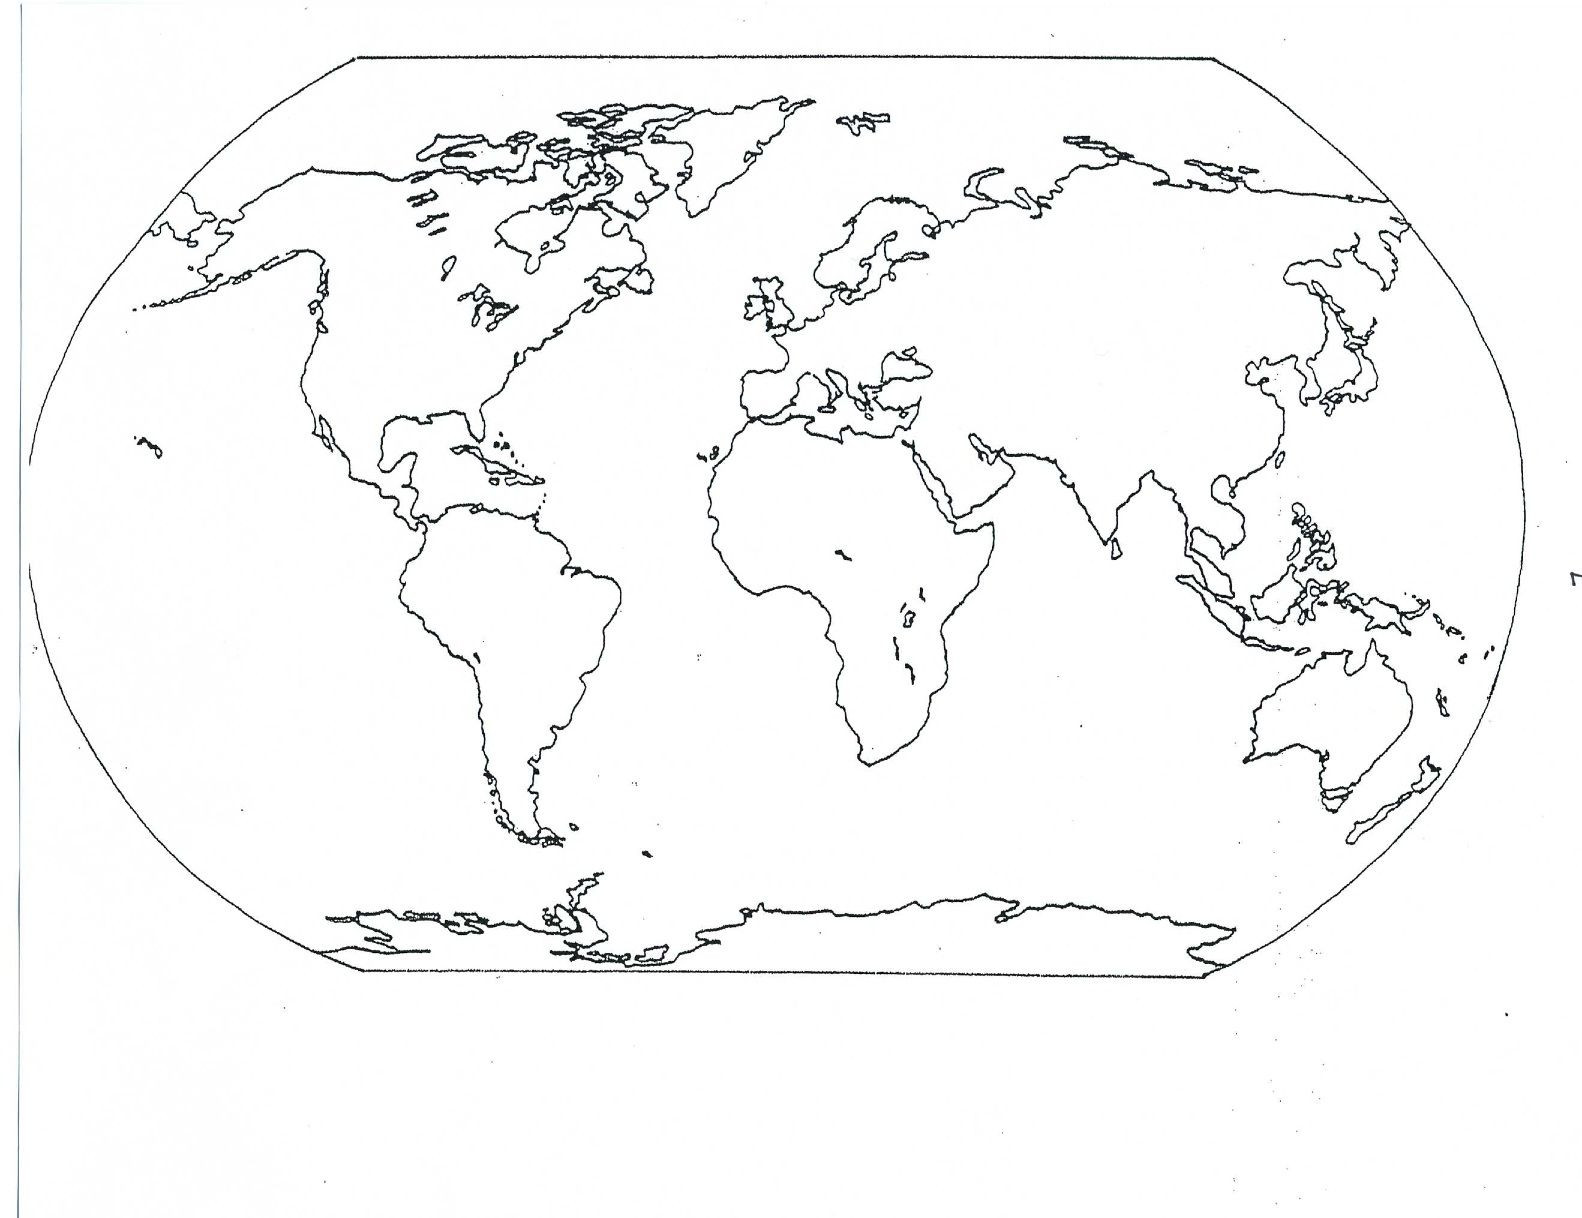 Printable Map To Label Continents And Oceans Best Of Blank World Map 2nd Grade Pinterest